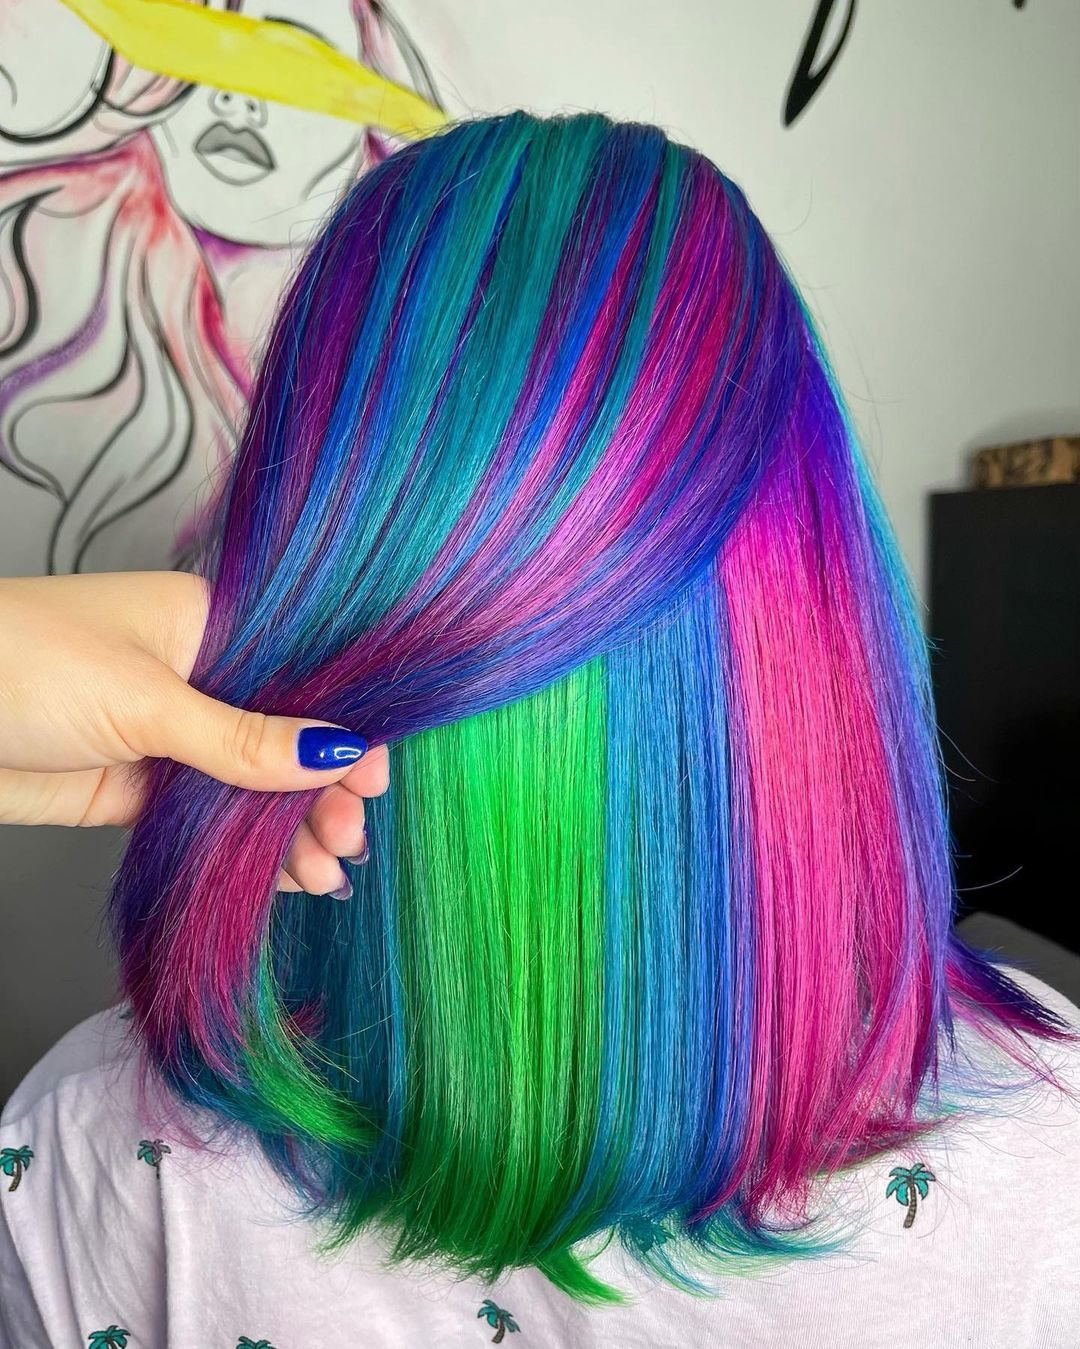 US Mall Lifes® | (✨NEW)HIDDEN RAINBOW GREEN COLORFUL COLORSHAIR WIG 100% High-Density WIG US Mall Lifes